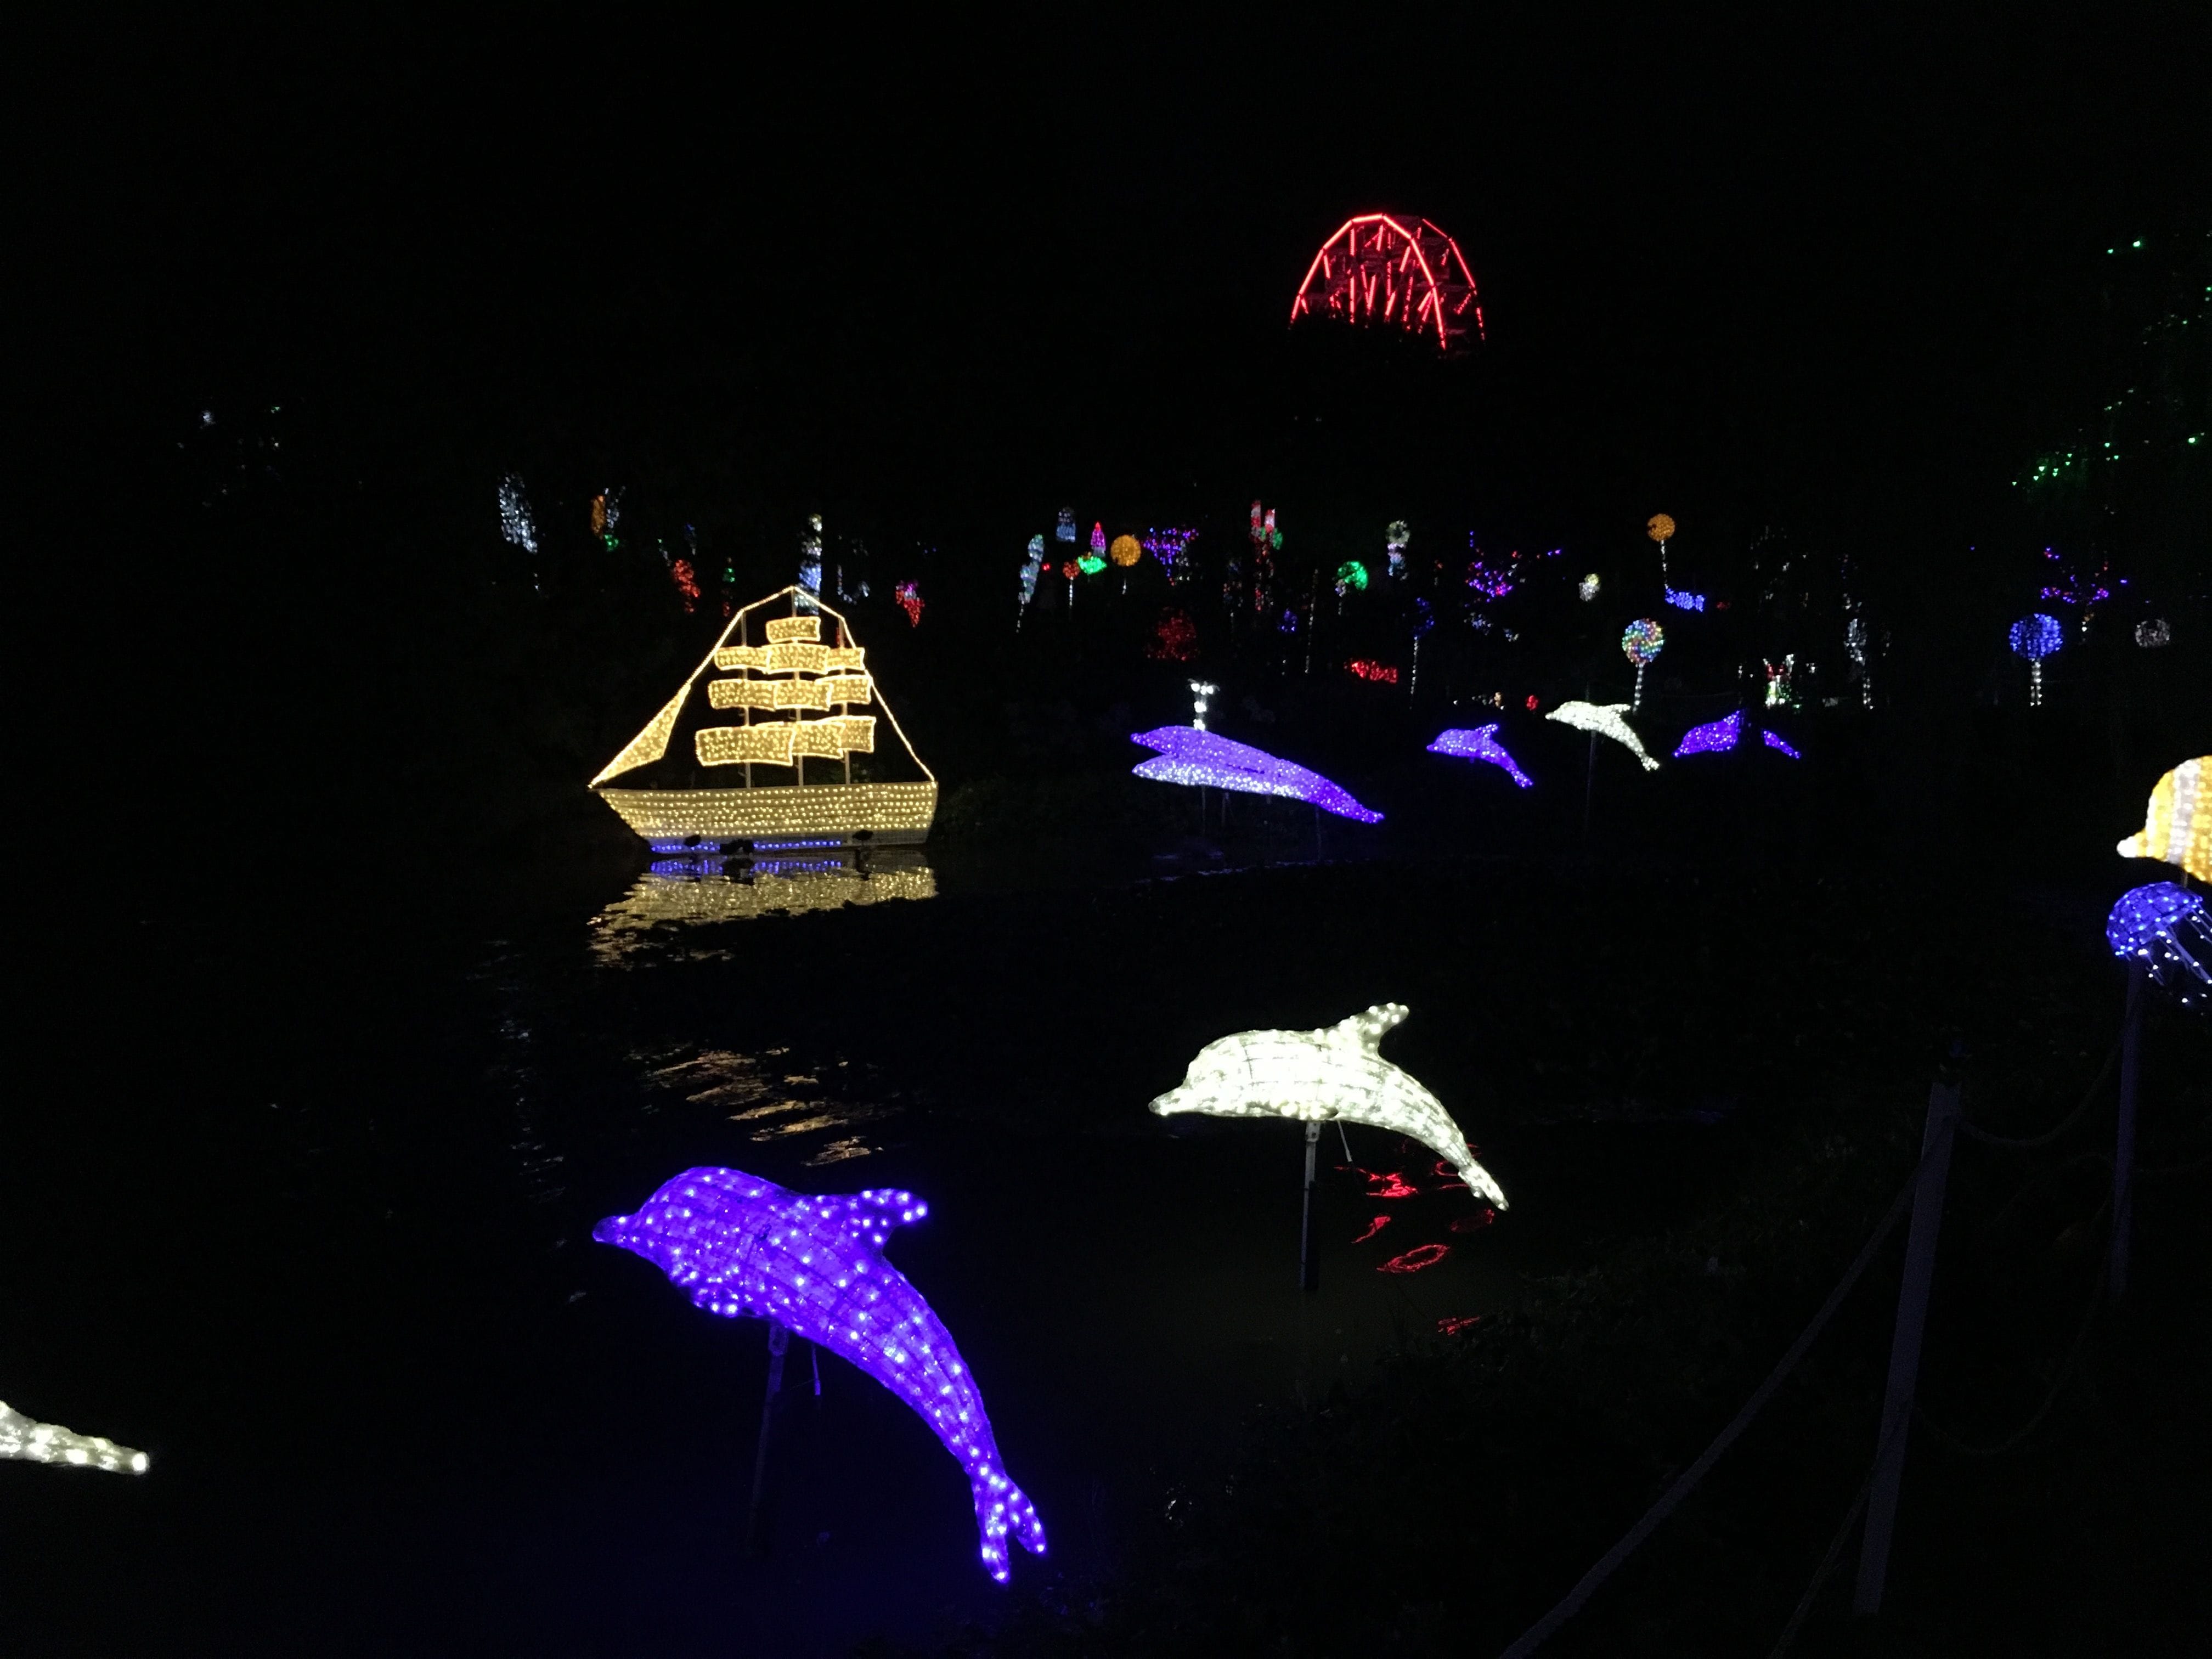 Hunter Valley Gardens Christmas Lights 2018-2019 Public Day Night Tour Image -5c149f631008a